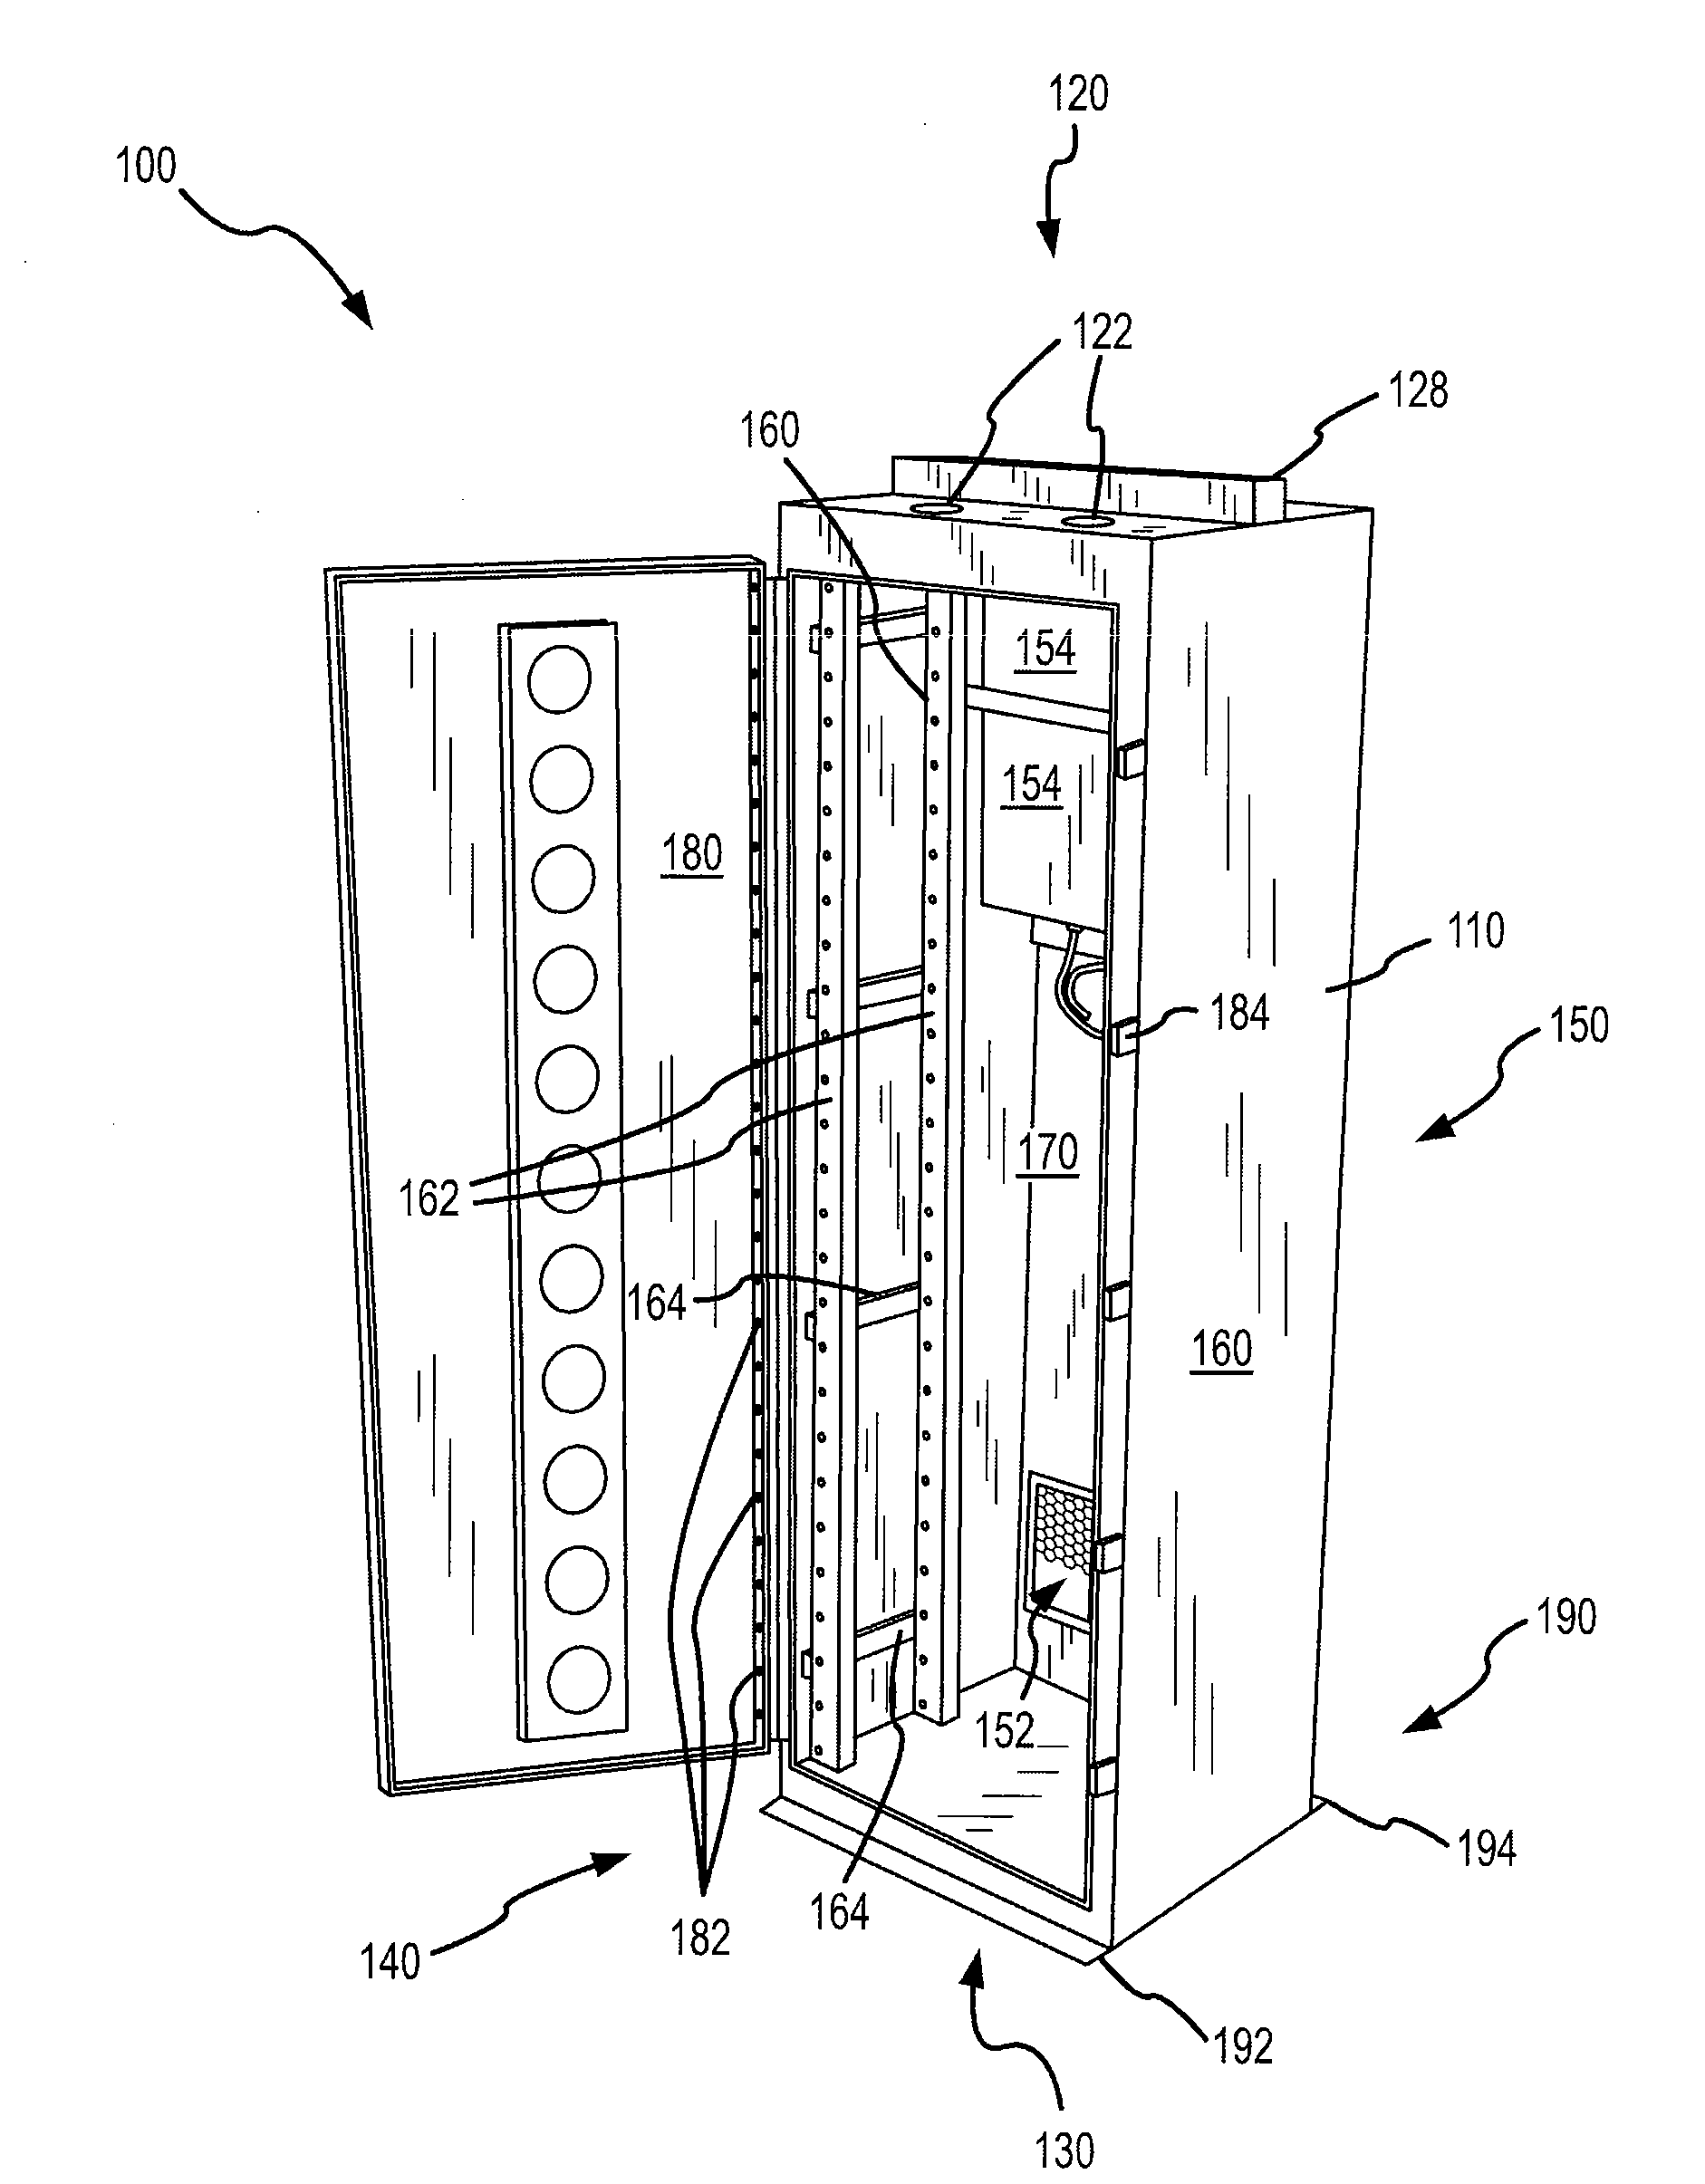 Protective telecommunications enclosure systems and methods